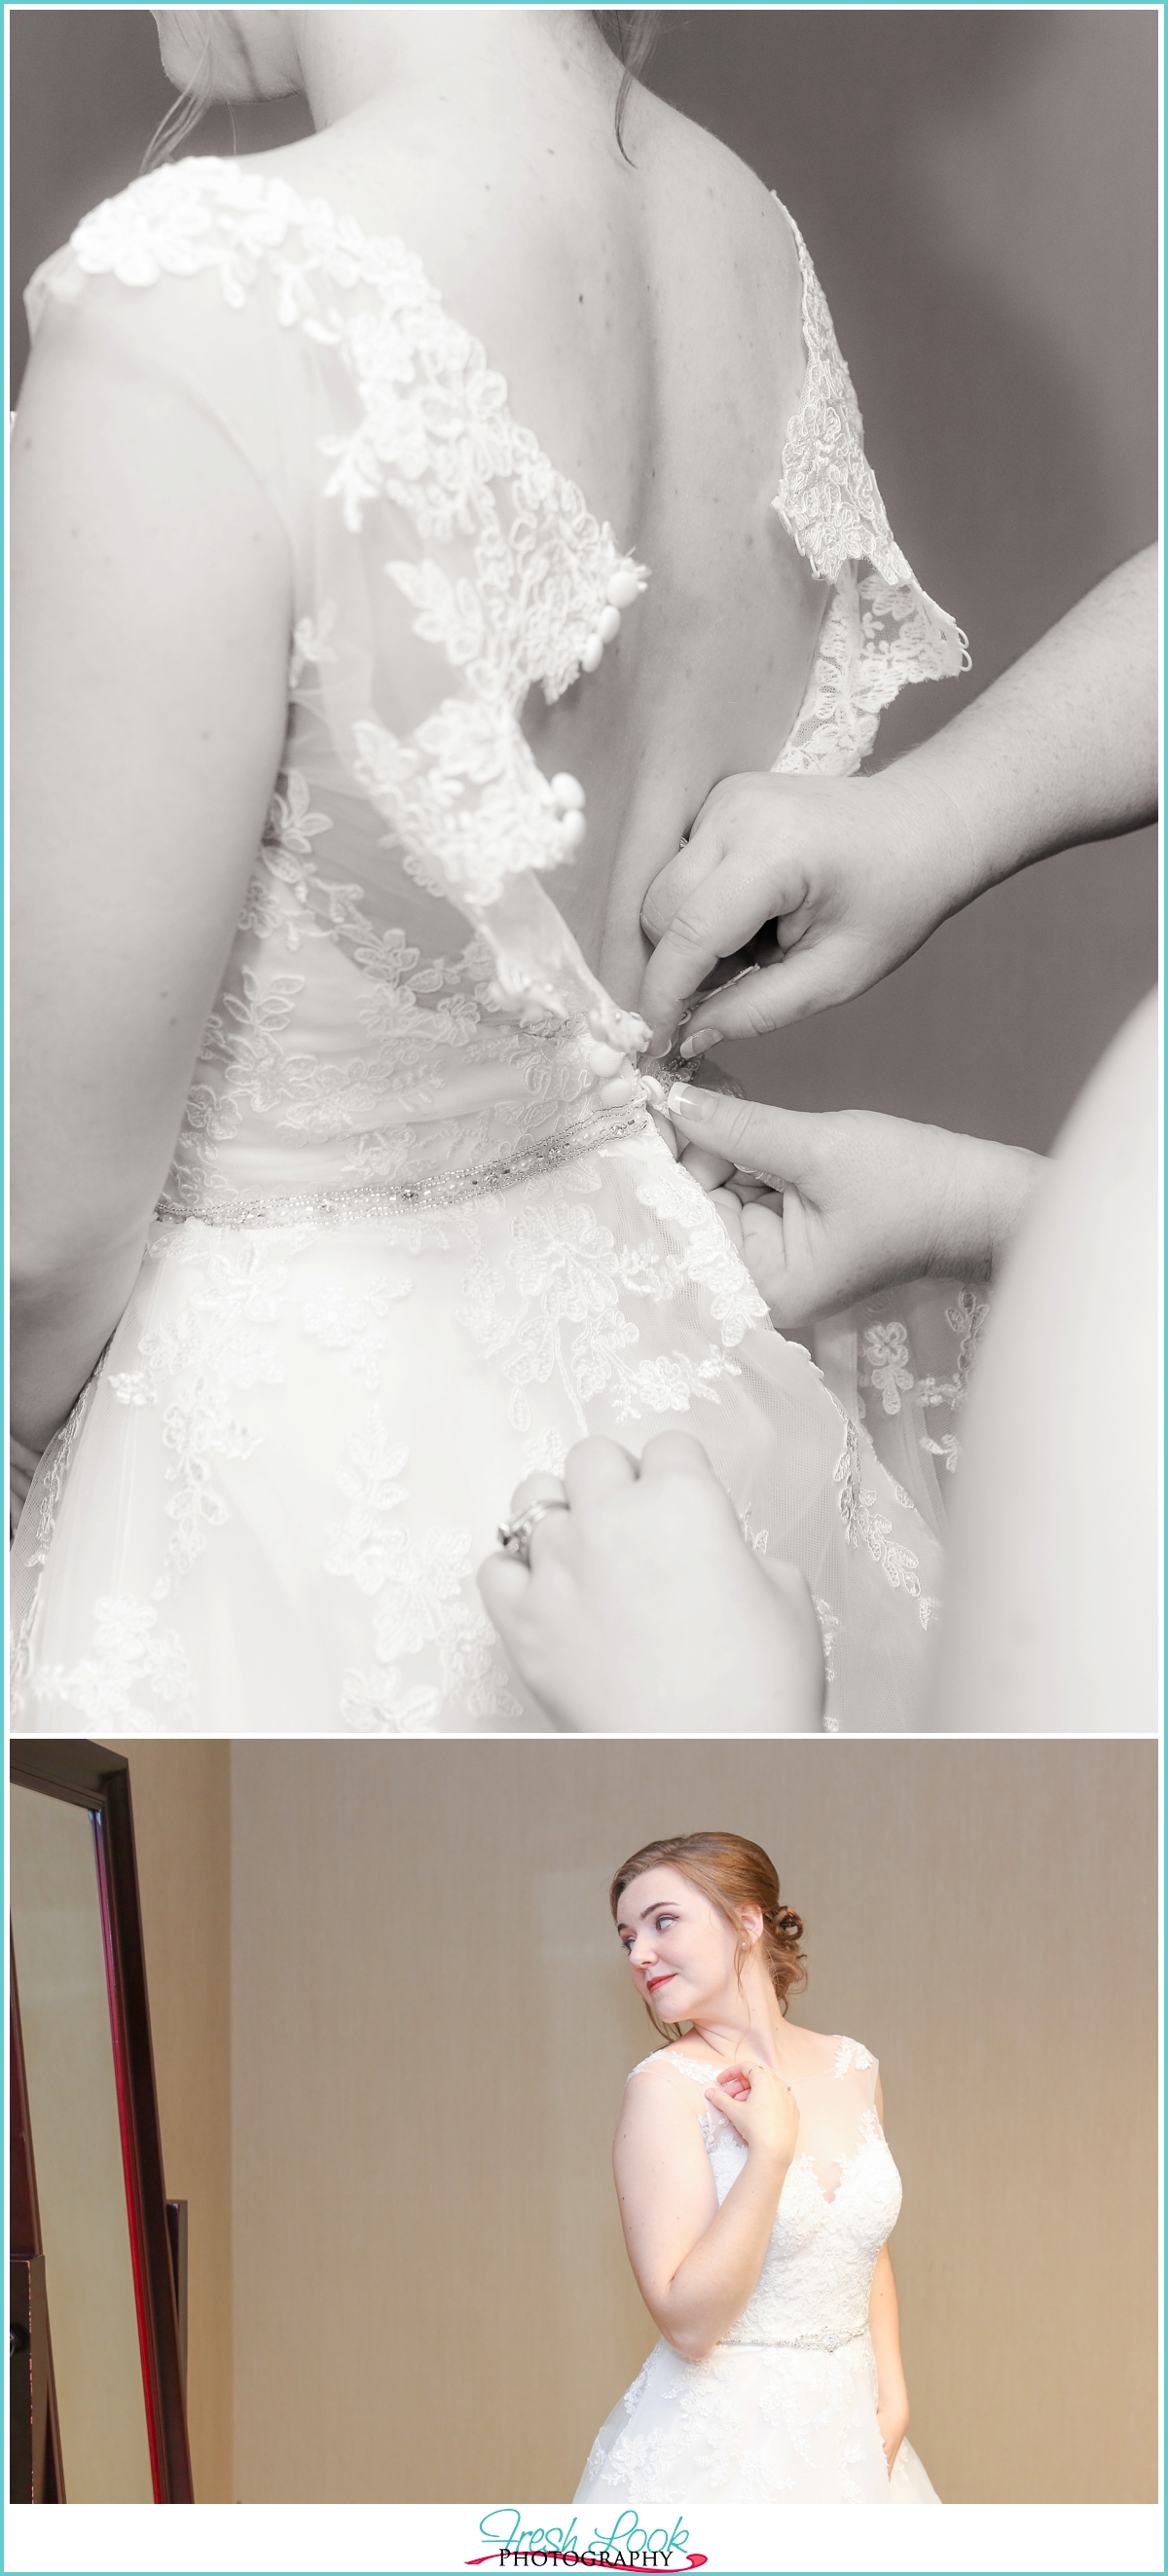 buttoning up the wedding dress